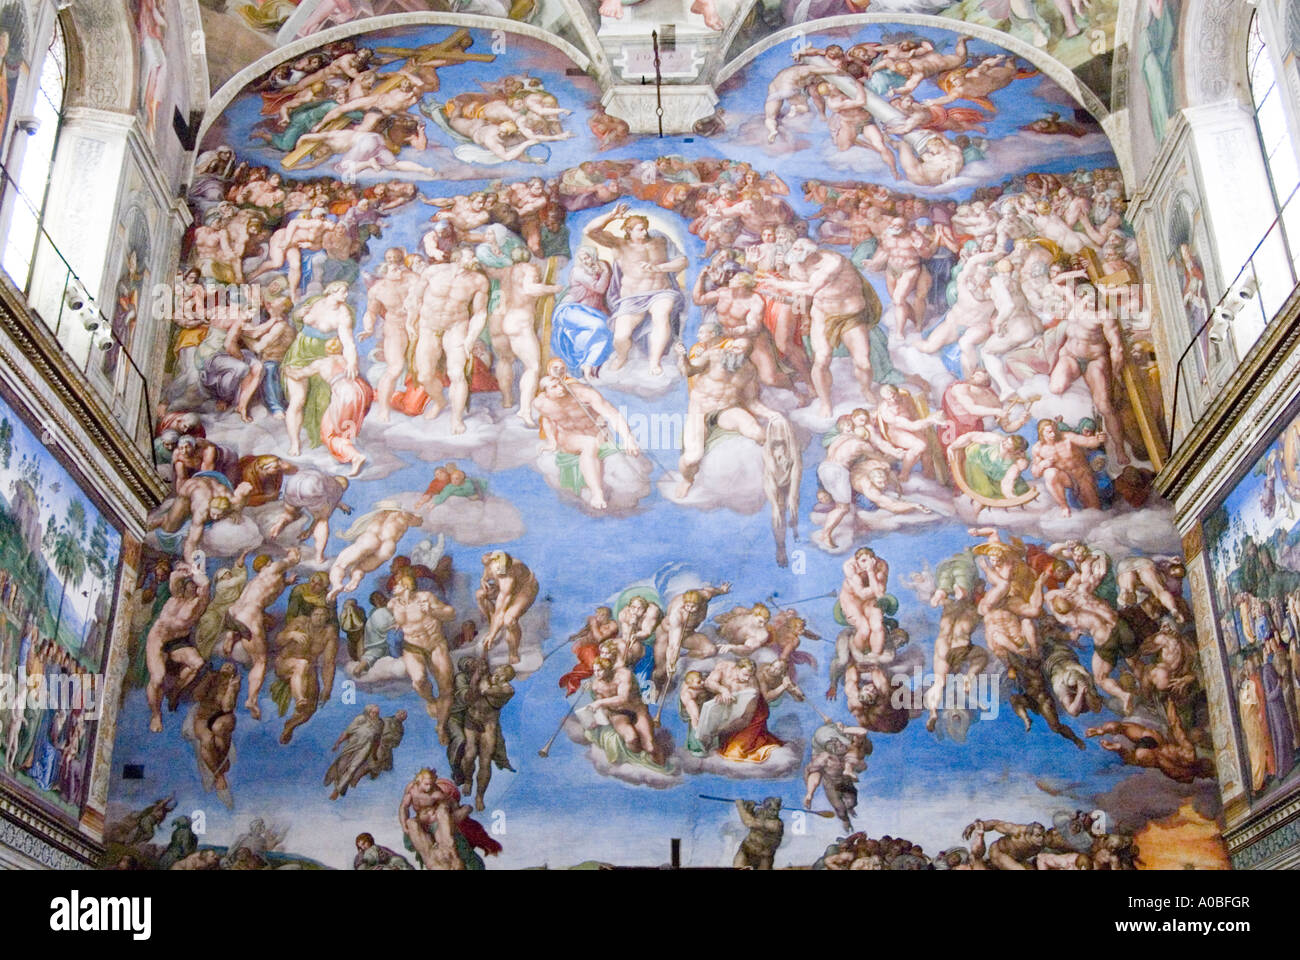 The Last Judgment by Michelangelo on the wall of the Sistine Chapel in the Vatican Museum Rome Italy Stock Photo